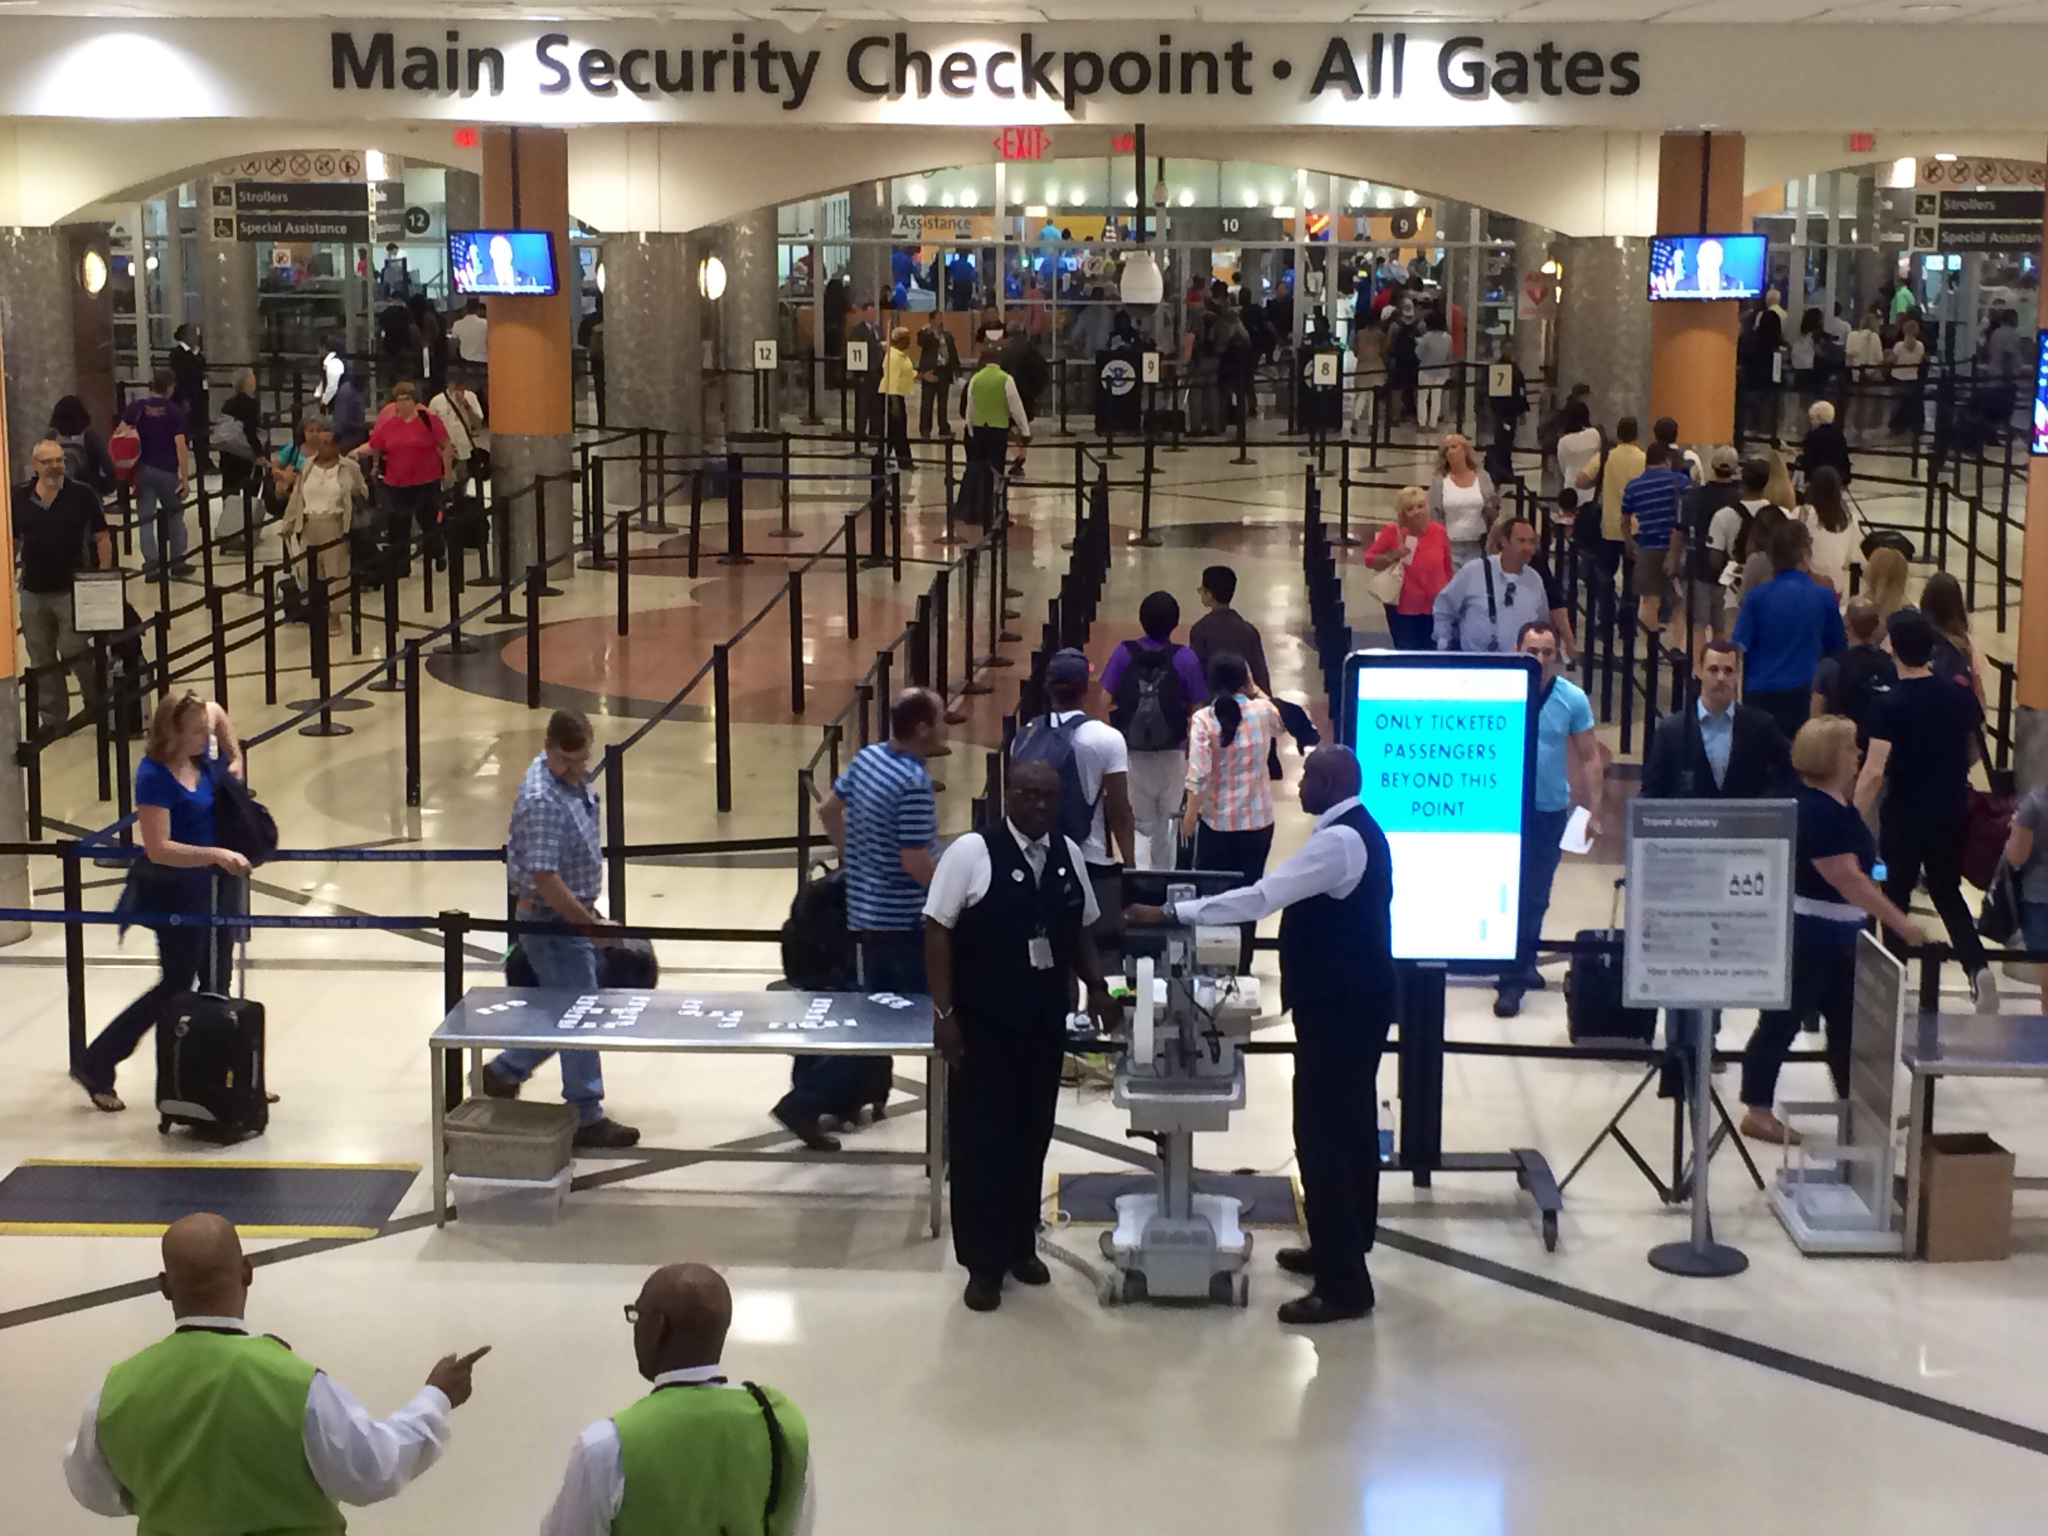 Travelers pass through the main security gate at Hartsfield-Jackson Atlanta International Airport, Friday, May 27, 2016. Memorial Day weekend, the unofficial start of summer vacations for many and a busy travel period, serves as a crucial test for the TSA agency. (AP Photo/Jeff Martin)